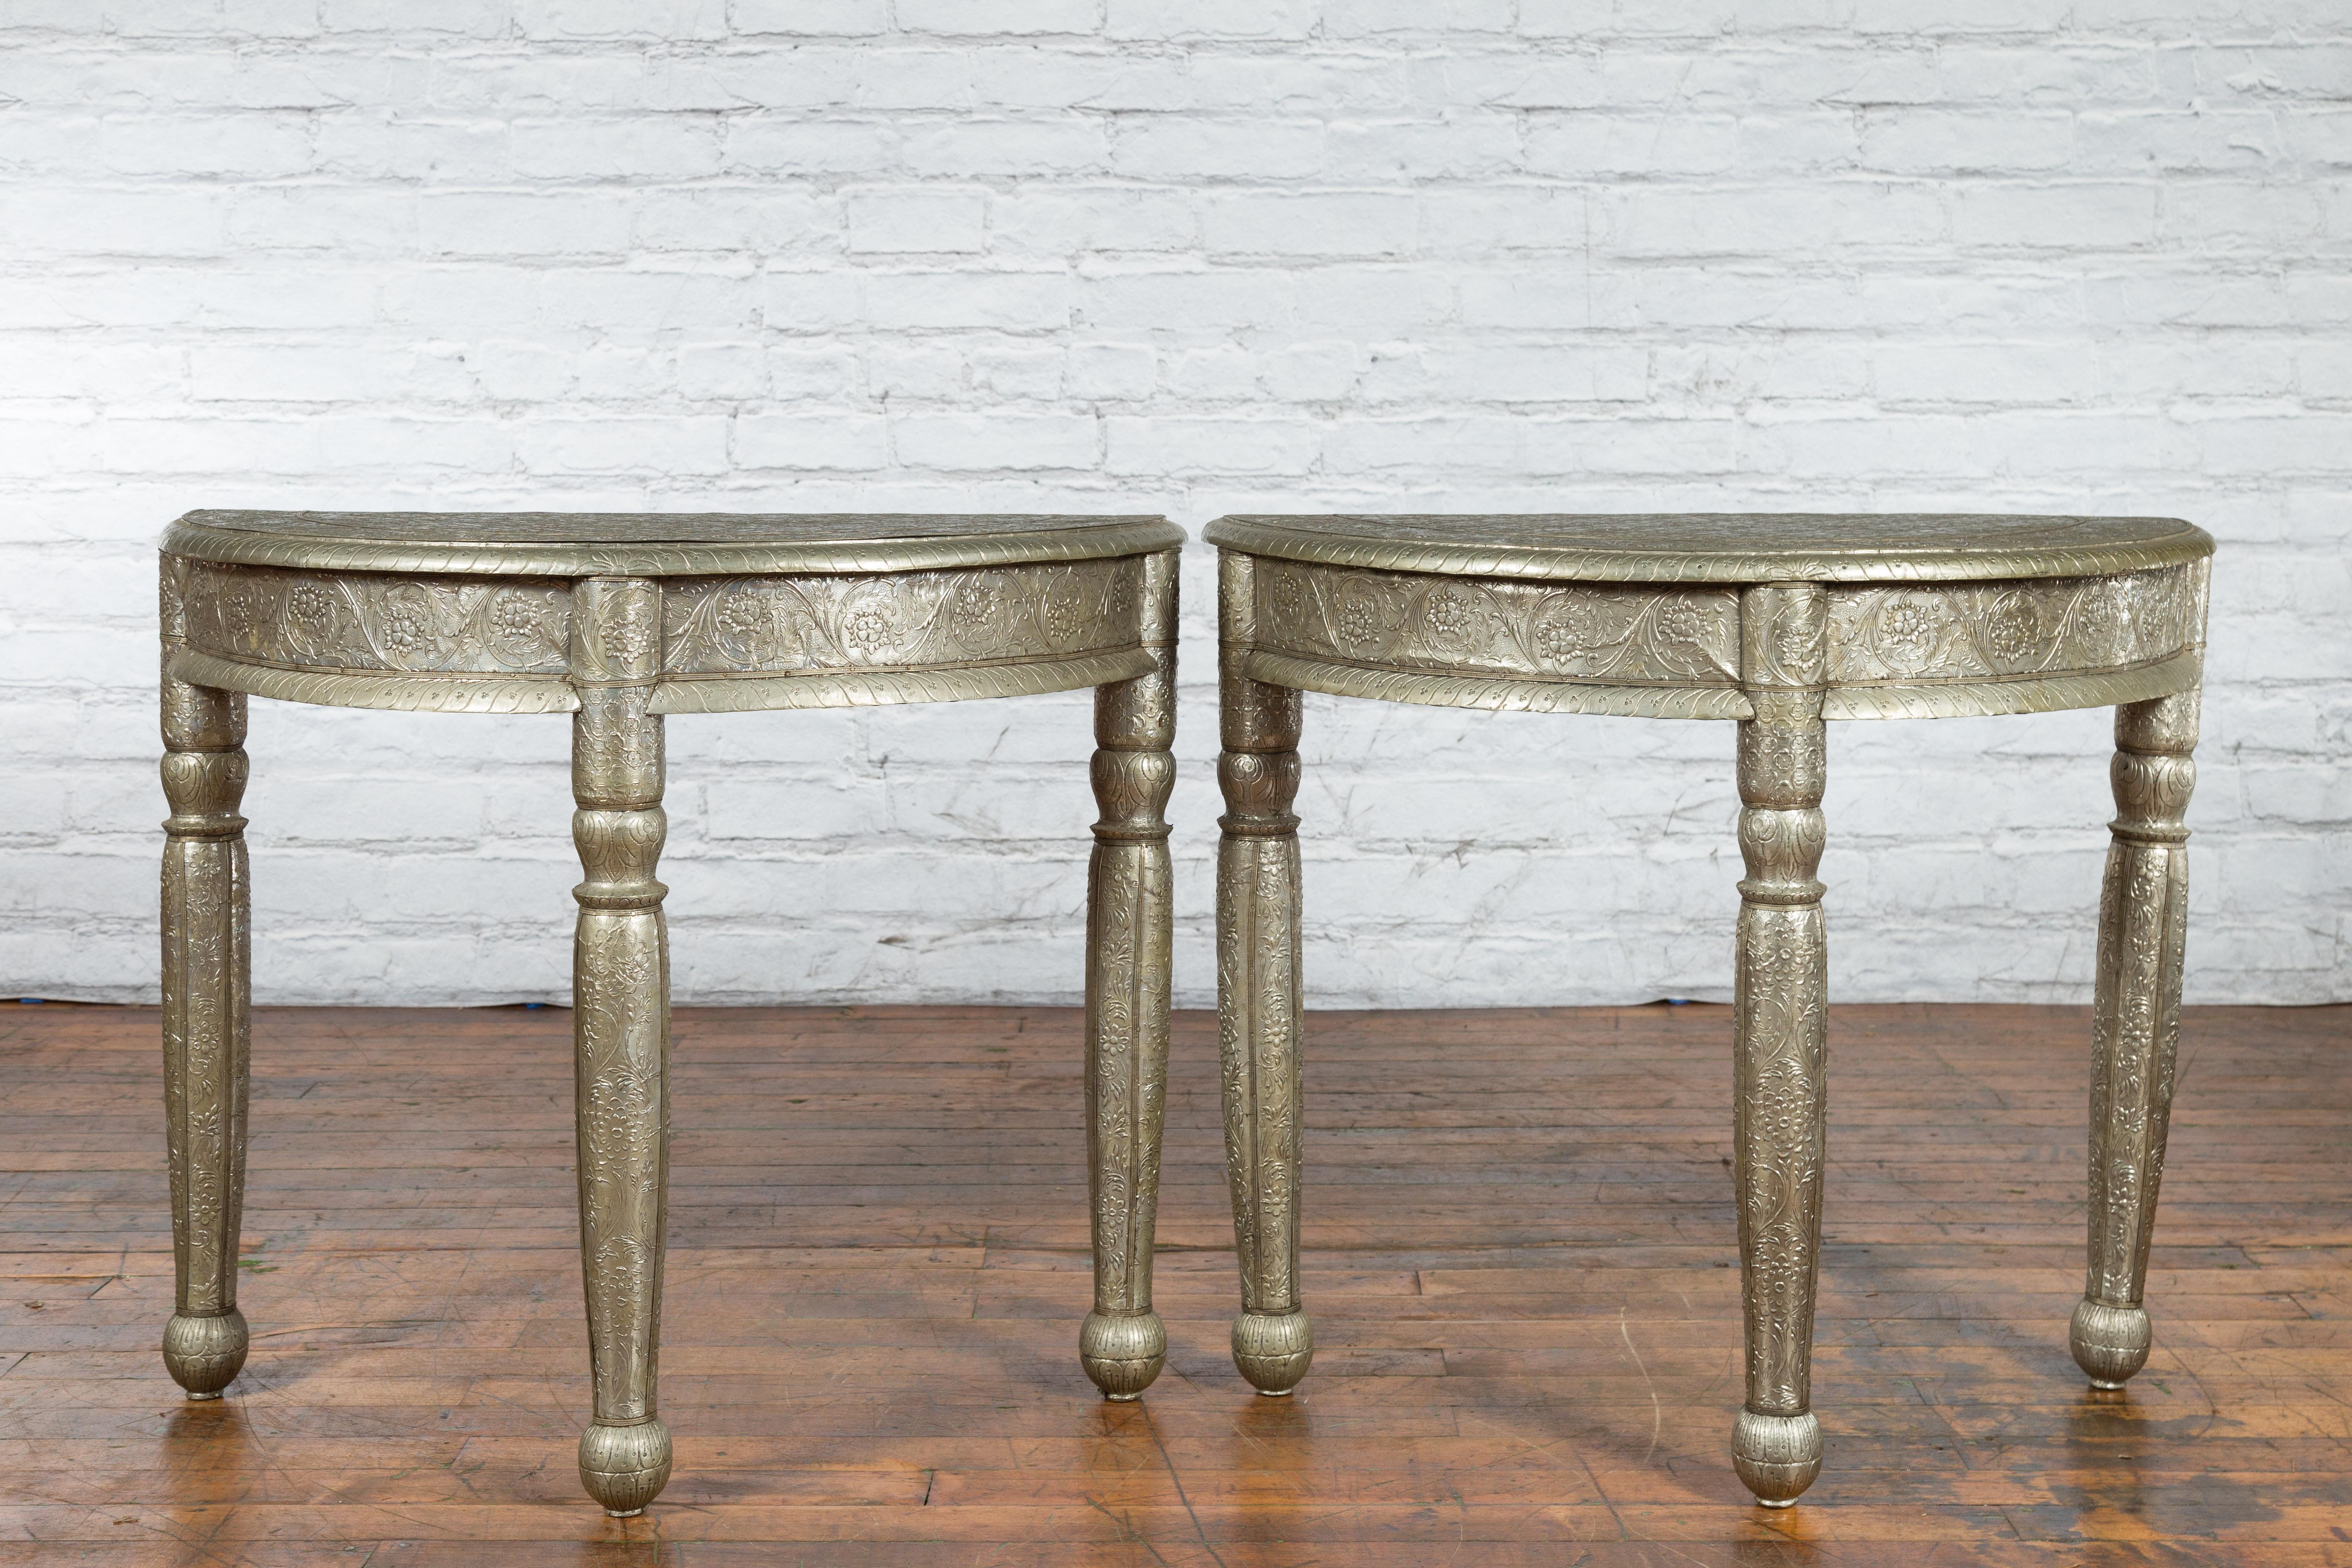 A pair of antique Indian repoussé demi-lune tables from the 19th century, with floral arabesques and made of metal sheathing over wood. Created in India during the 19th century, each of this pair of demilune tables features a semi-circular top